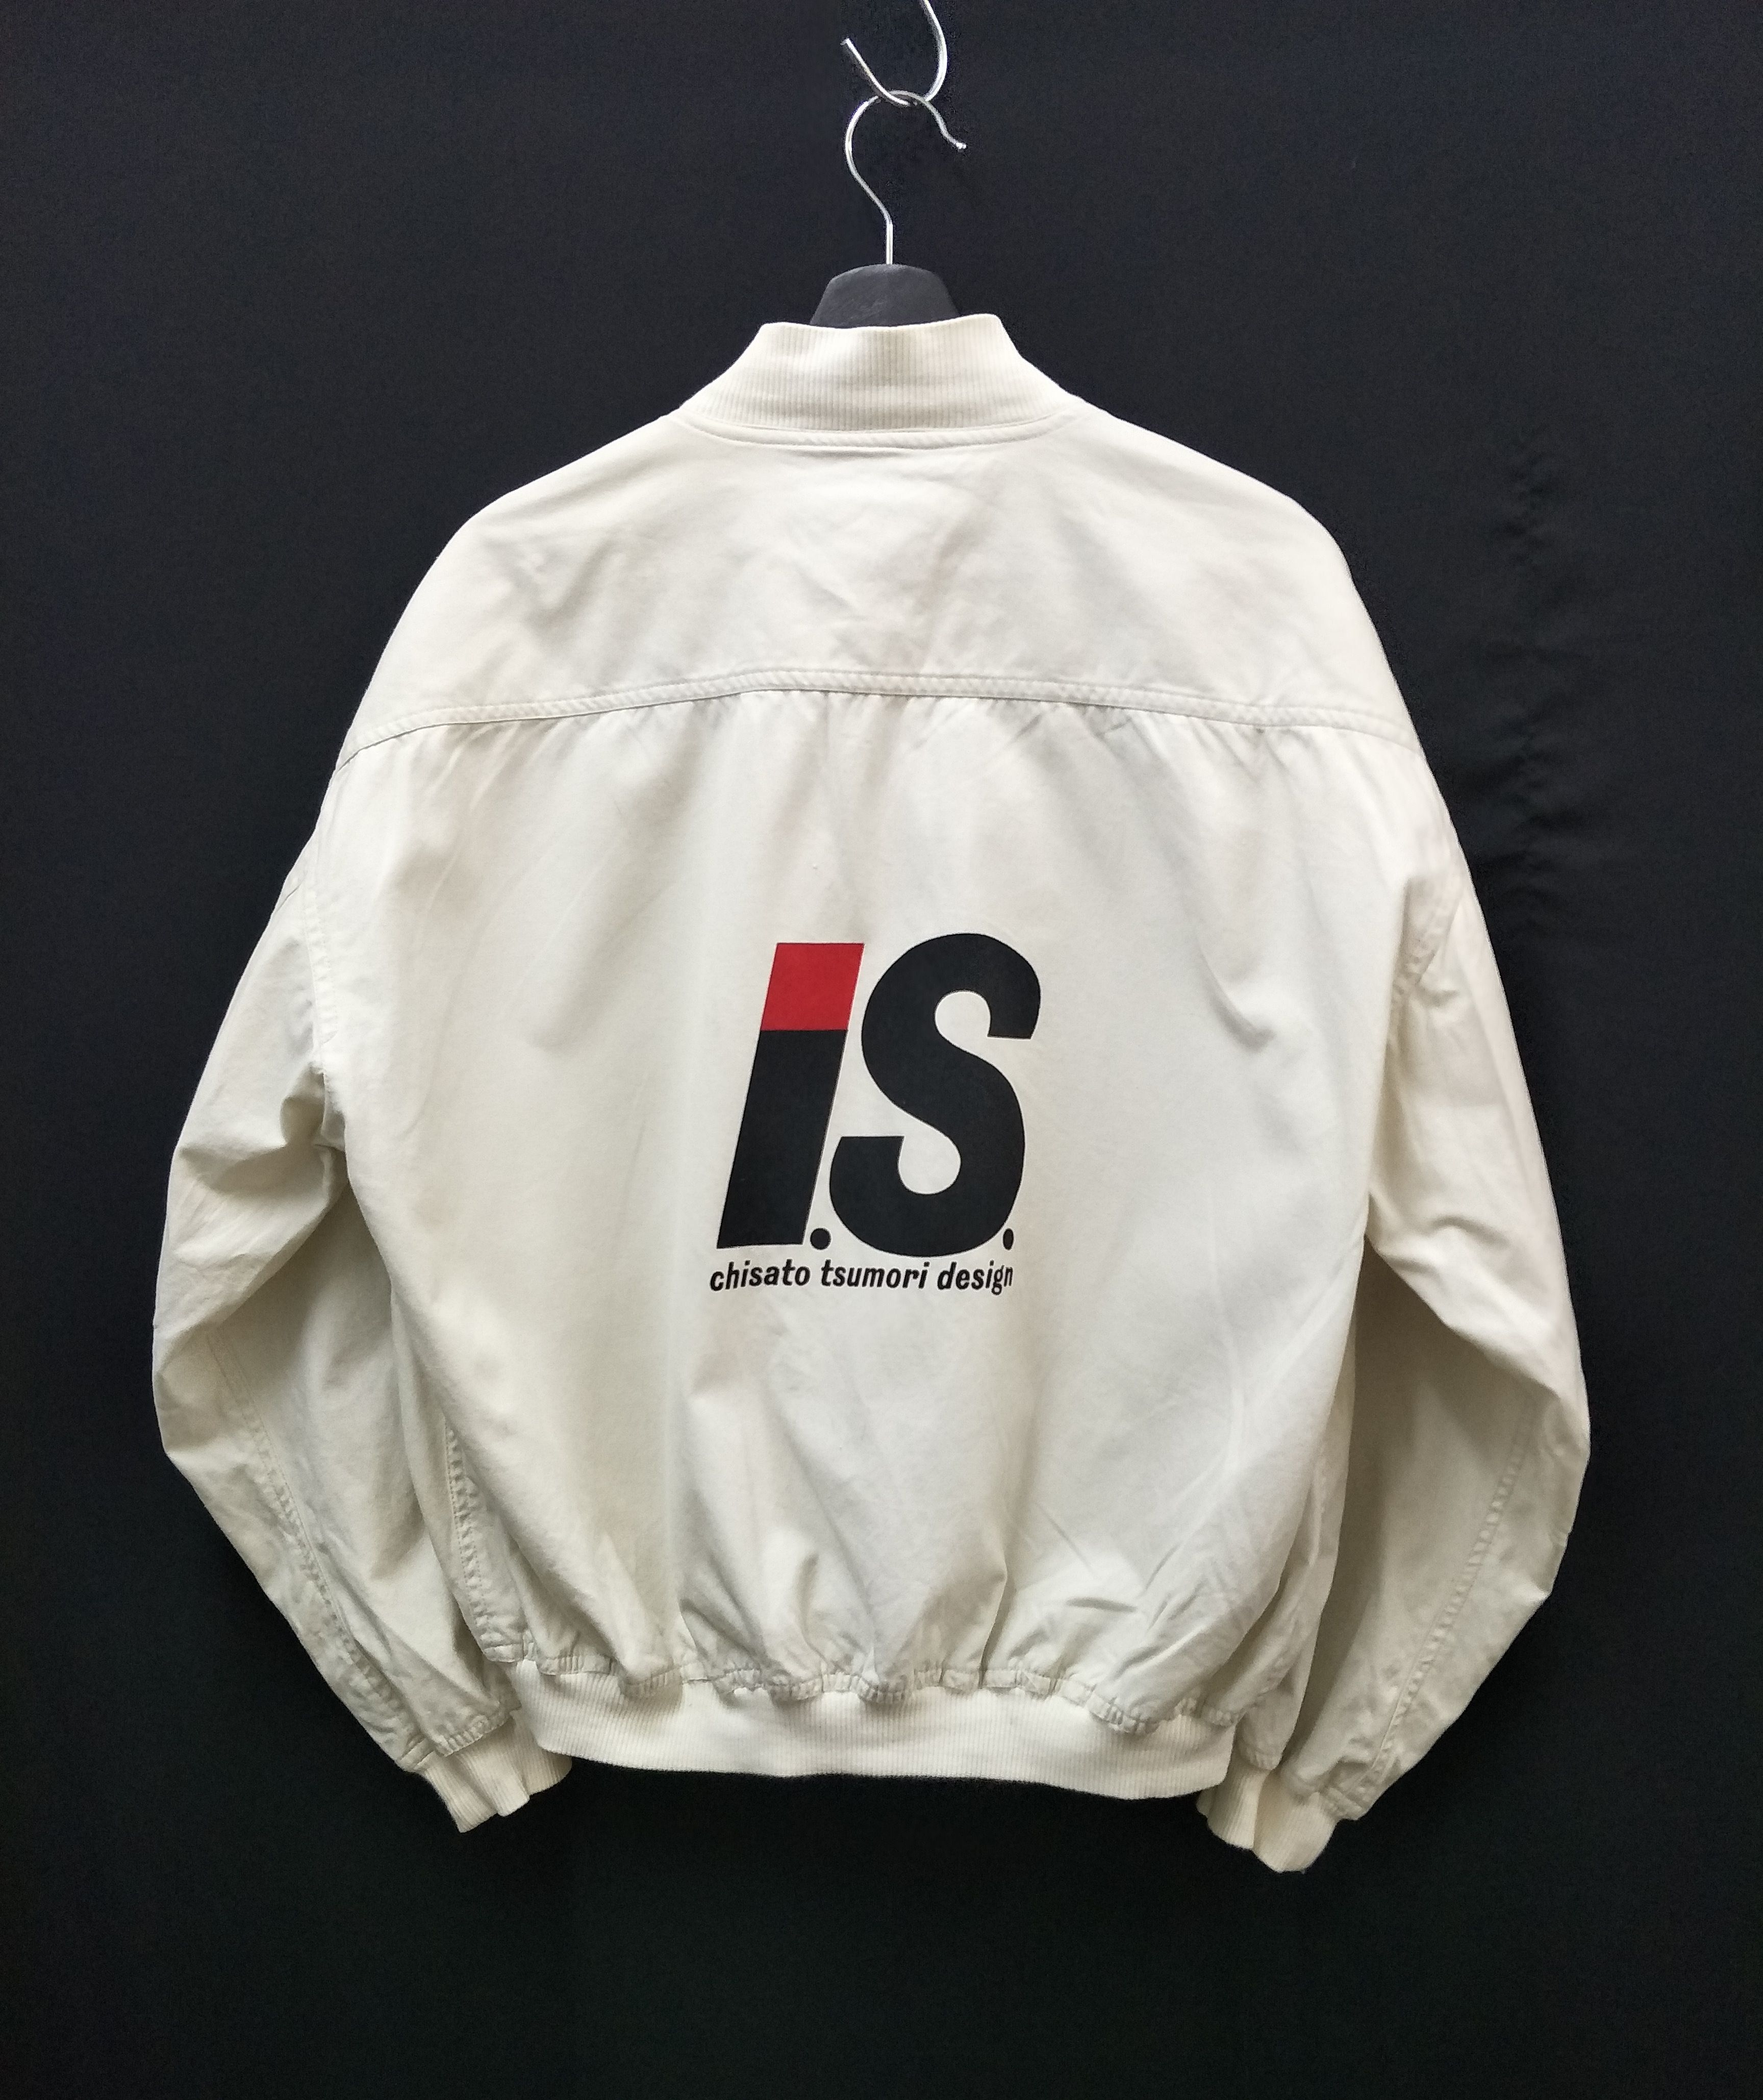 Issey Miyake Archive Issey Sport MA-1 Bombers Jacket | Grailed